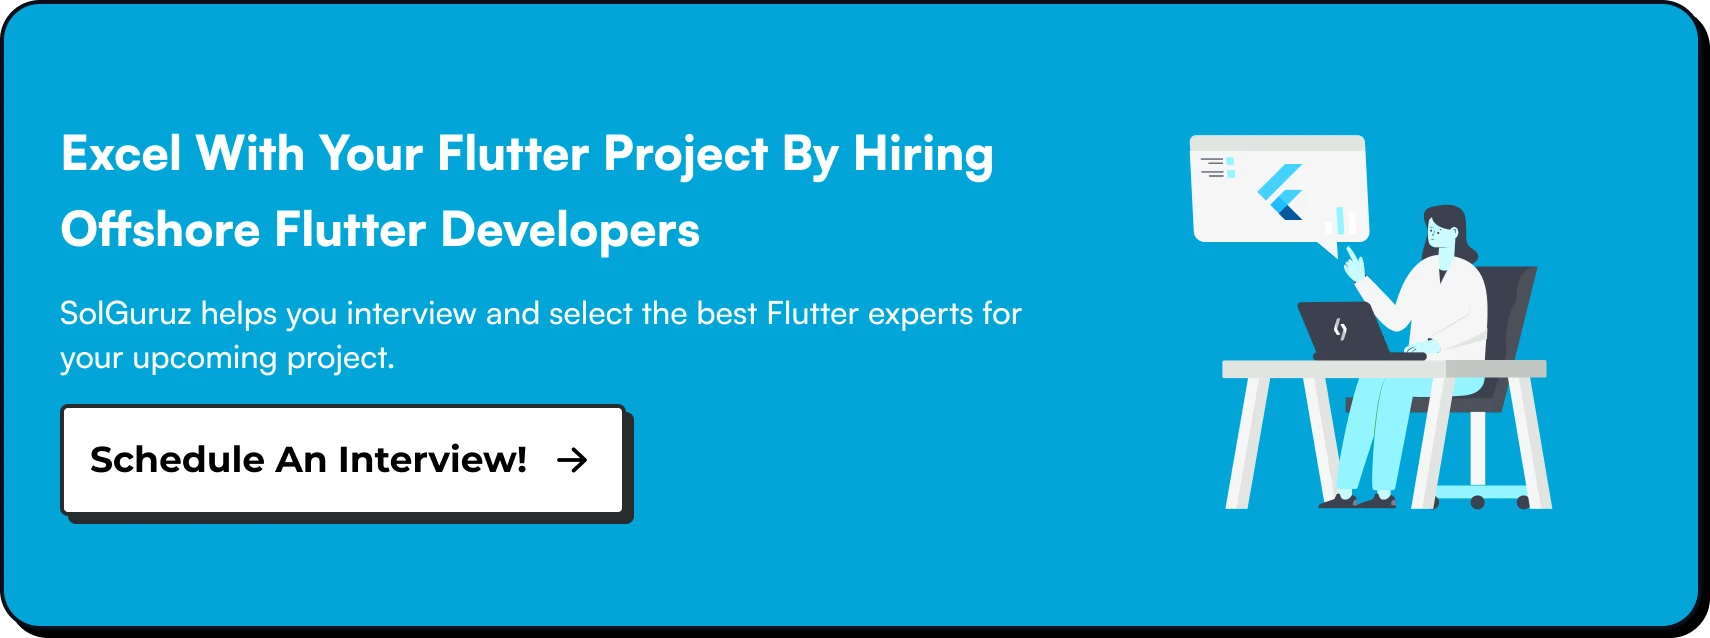 Excel With Your Flutter Project By Hiring Offshore Flutter Developers